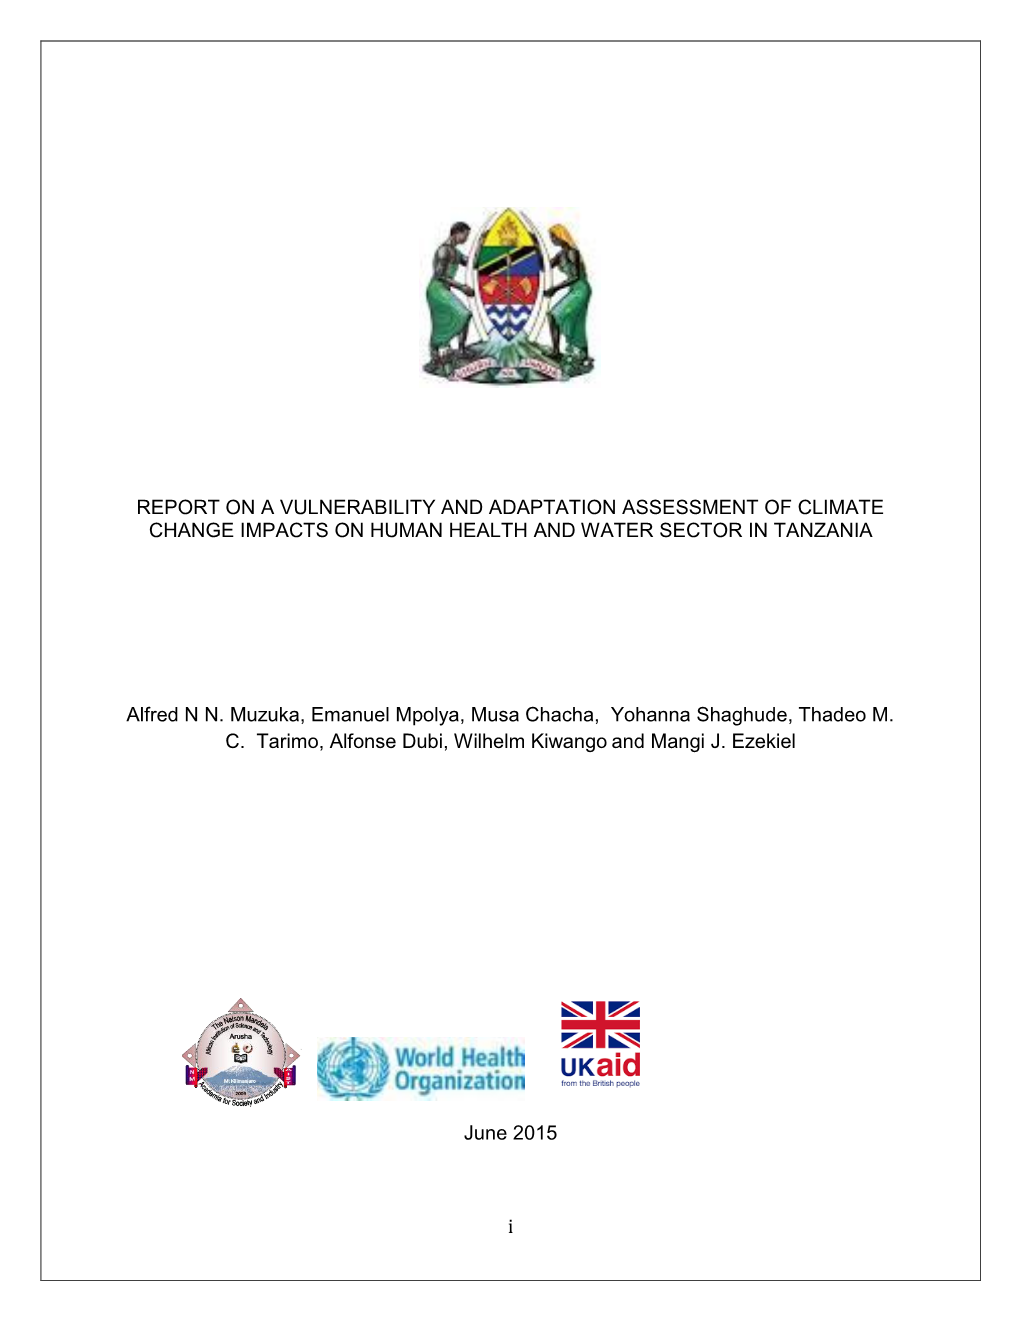 Report on a Vulnerability and Adaptation Assessment of Climate Change Impacts on Human Health and Water Sector in Tanzania